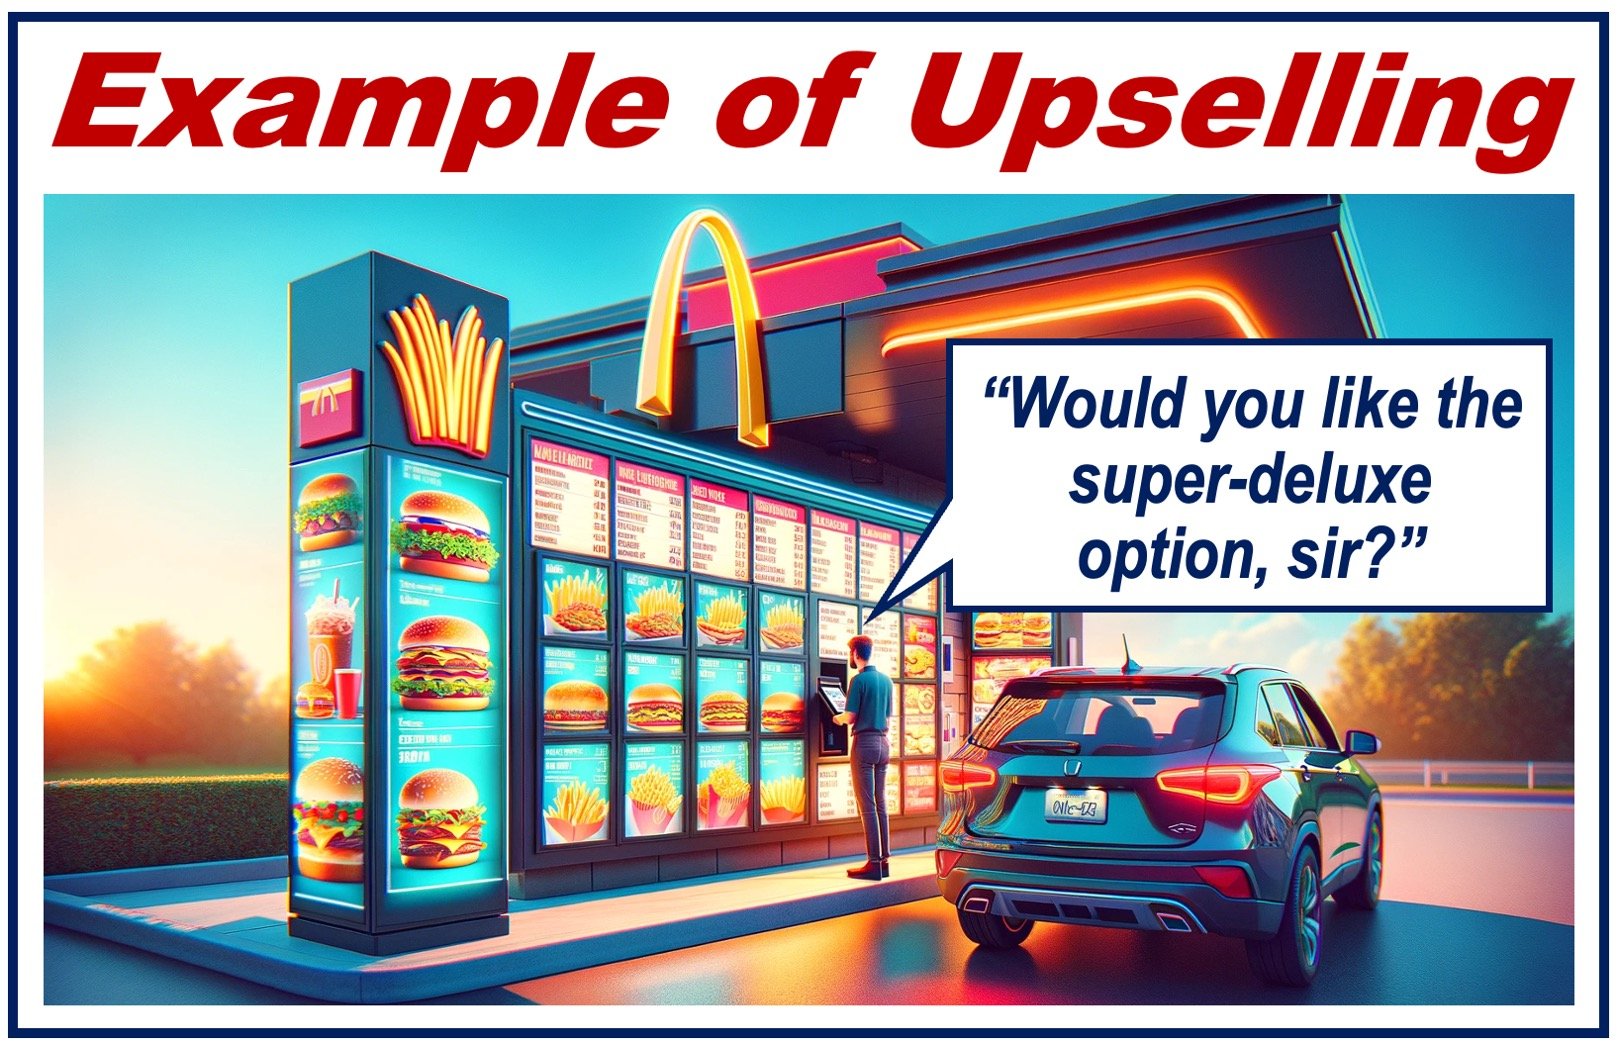 Example of upselling